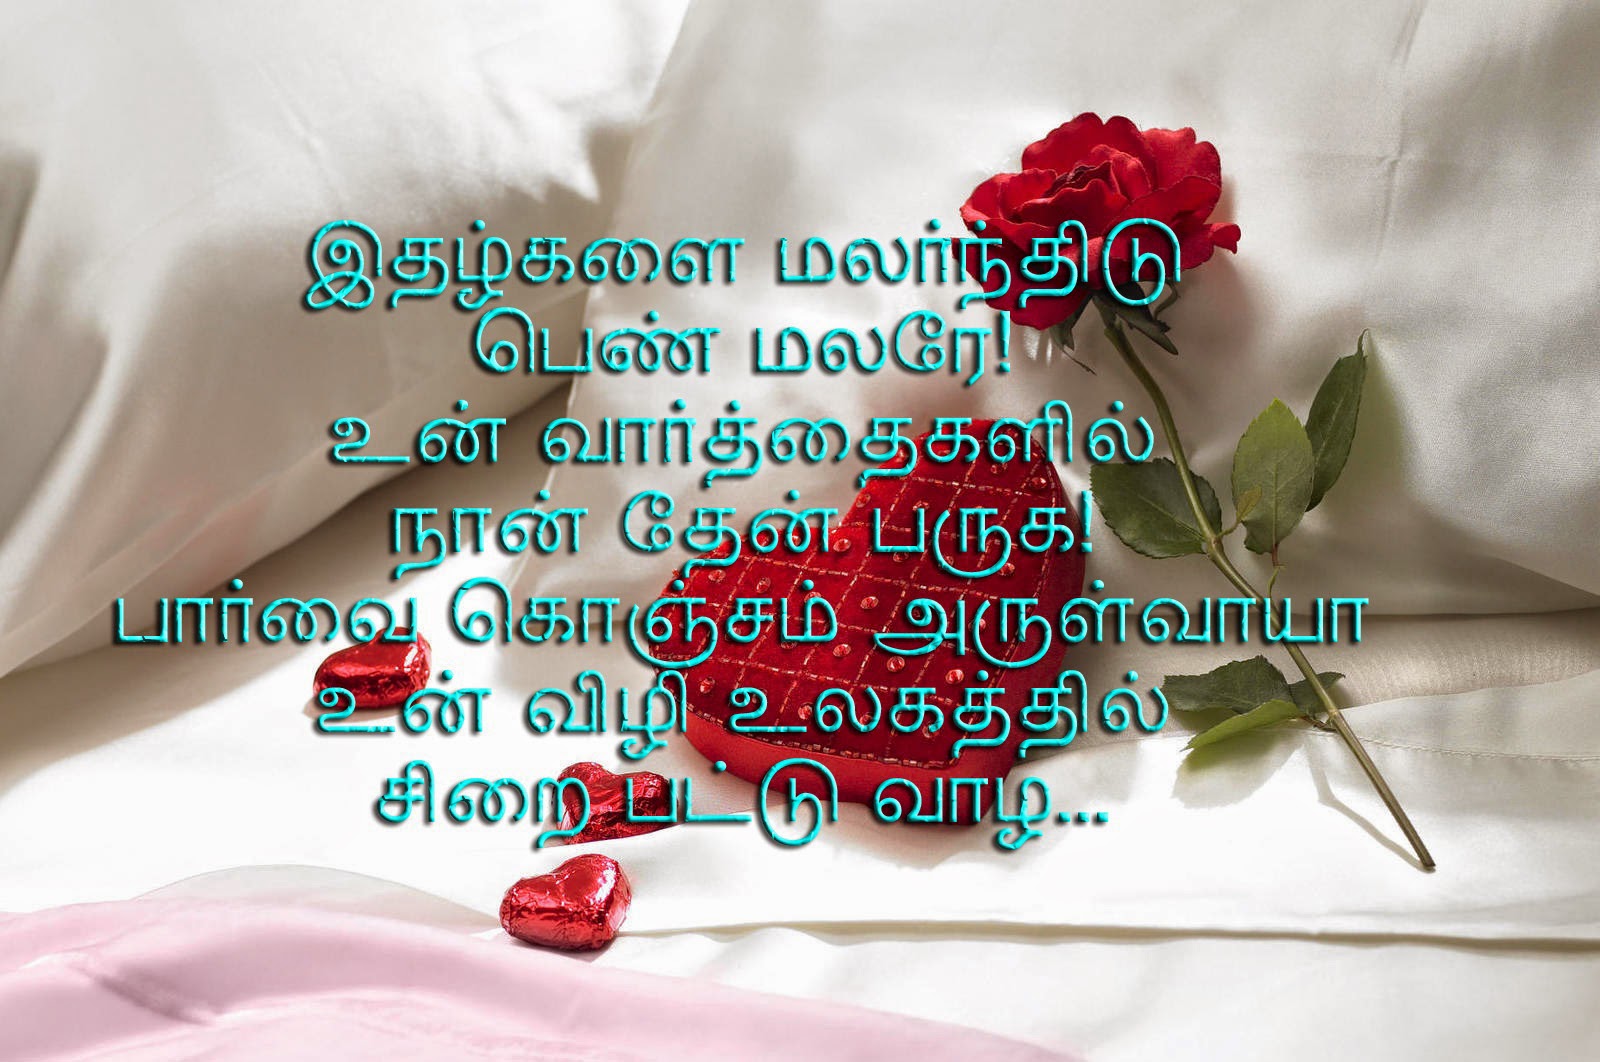 Cute Love Poems in Tamil With Picture Wallpaper Quotes Wallpapers